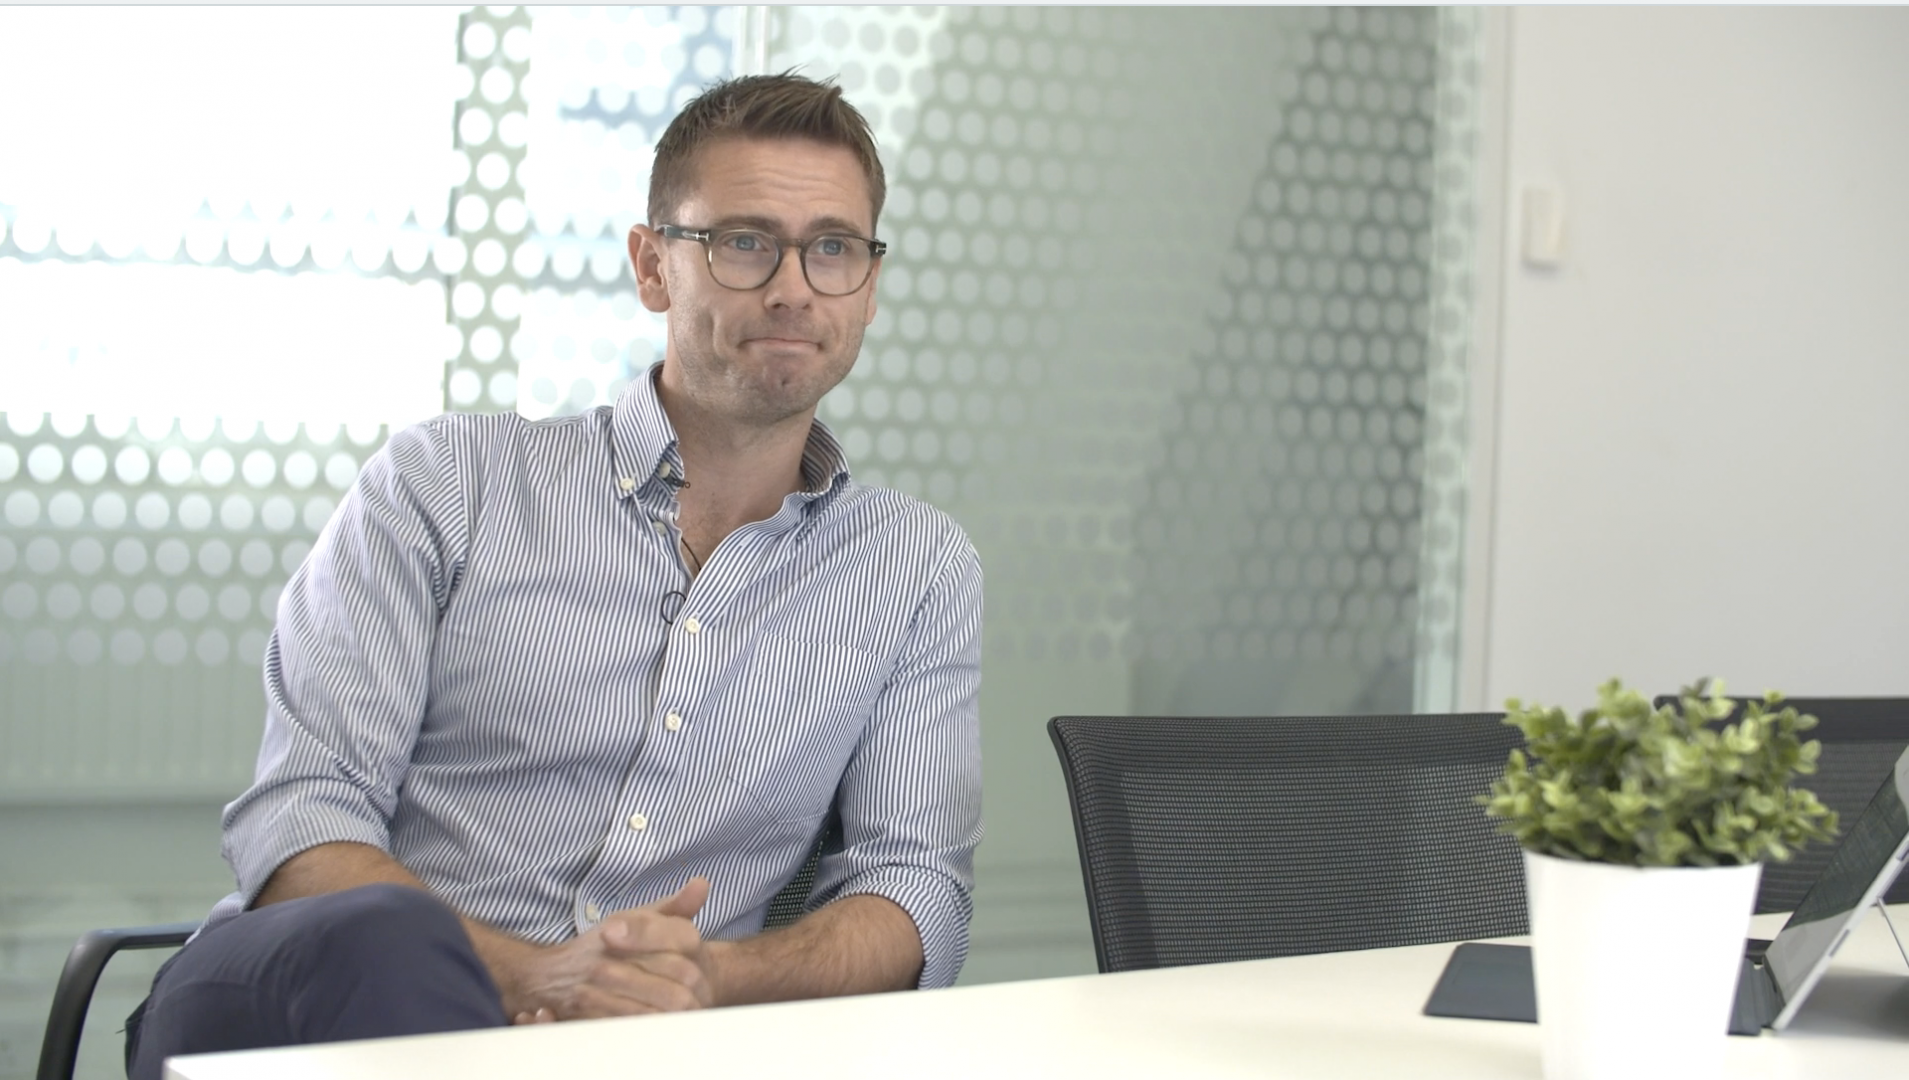 James Webb, Managing Director of Propel recruitment agency video about working with The Wow Company Accountants